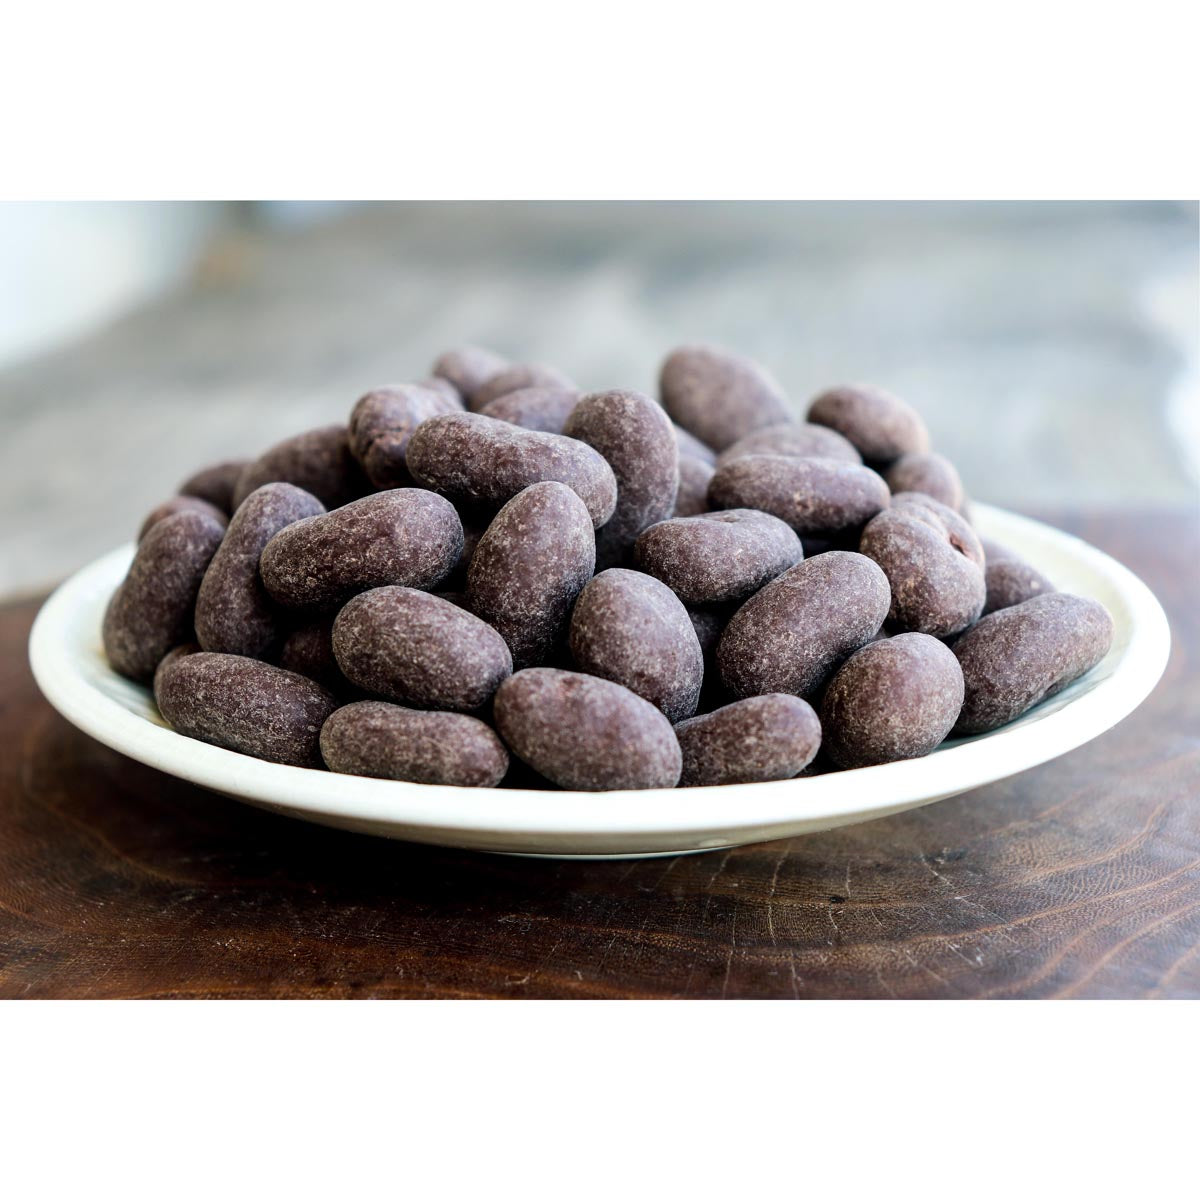 60% Chocolate Covered Almonds in a bowl 